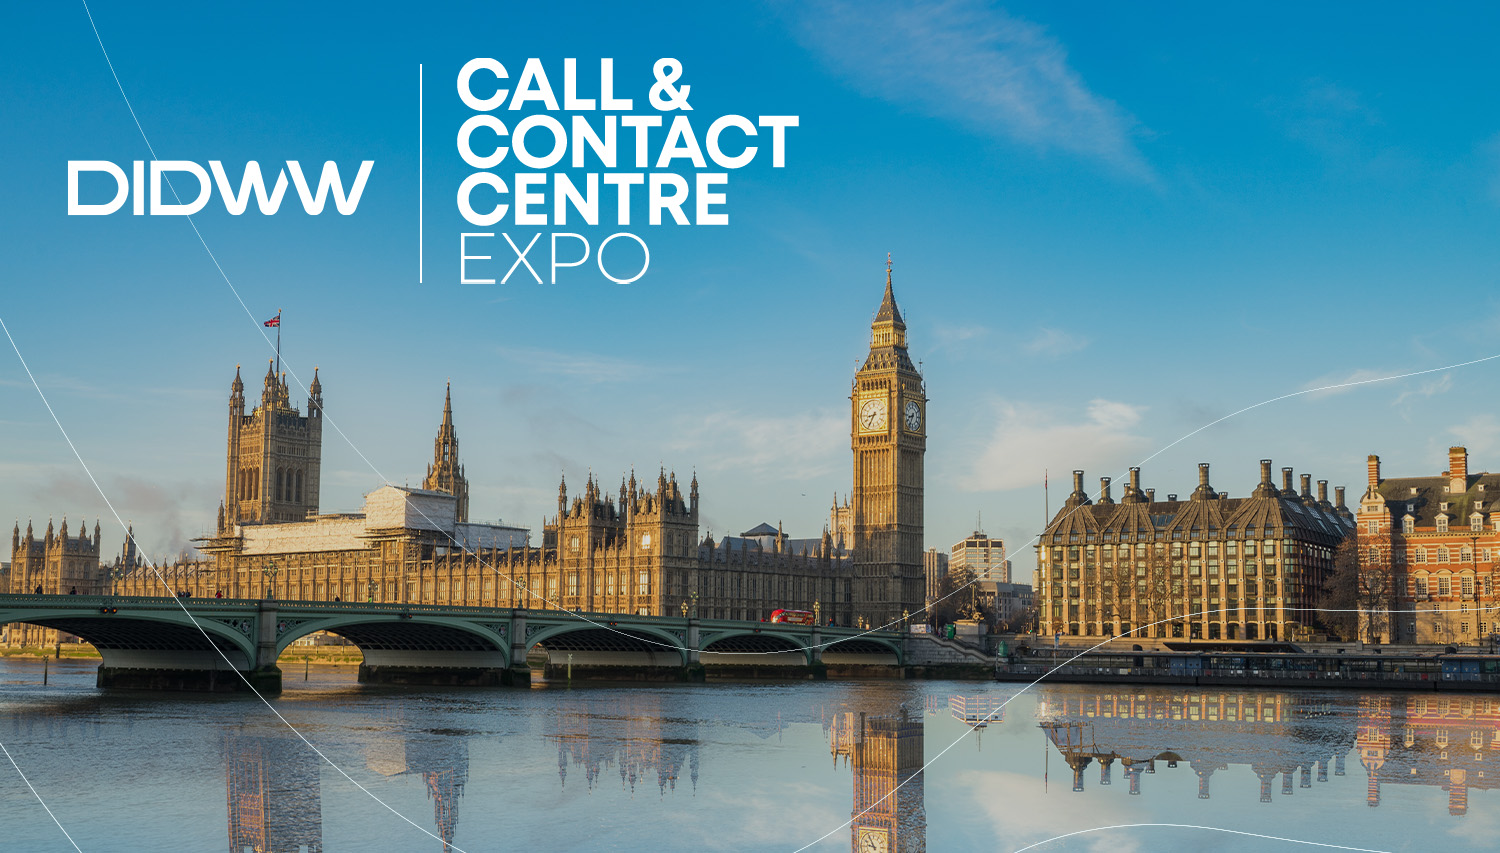 DIDWW to present advanced Voice and SMS solutions at Call & Contact Centre Expo image